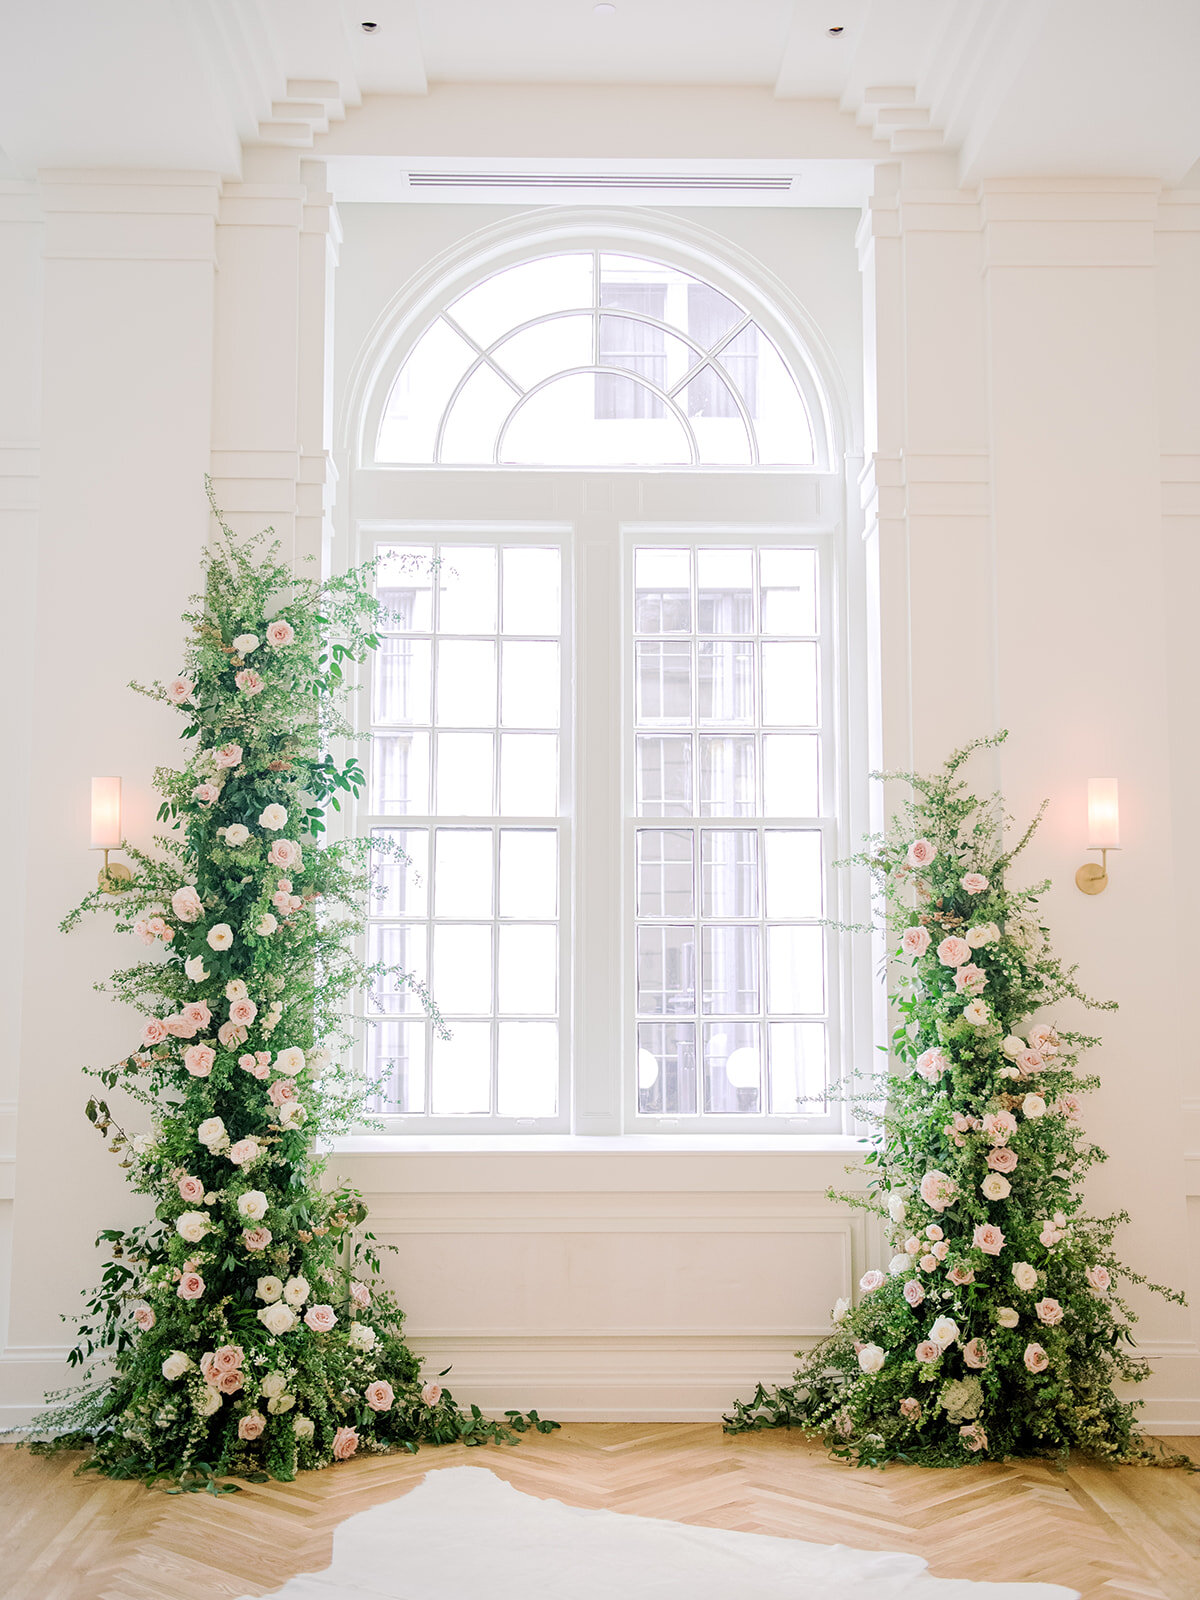 Asymmetrical floral installation growing up either side of the windows in the Noelle. Nashville Wedding Florist.